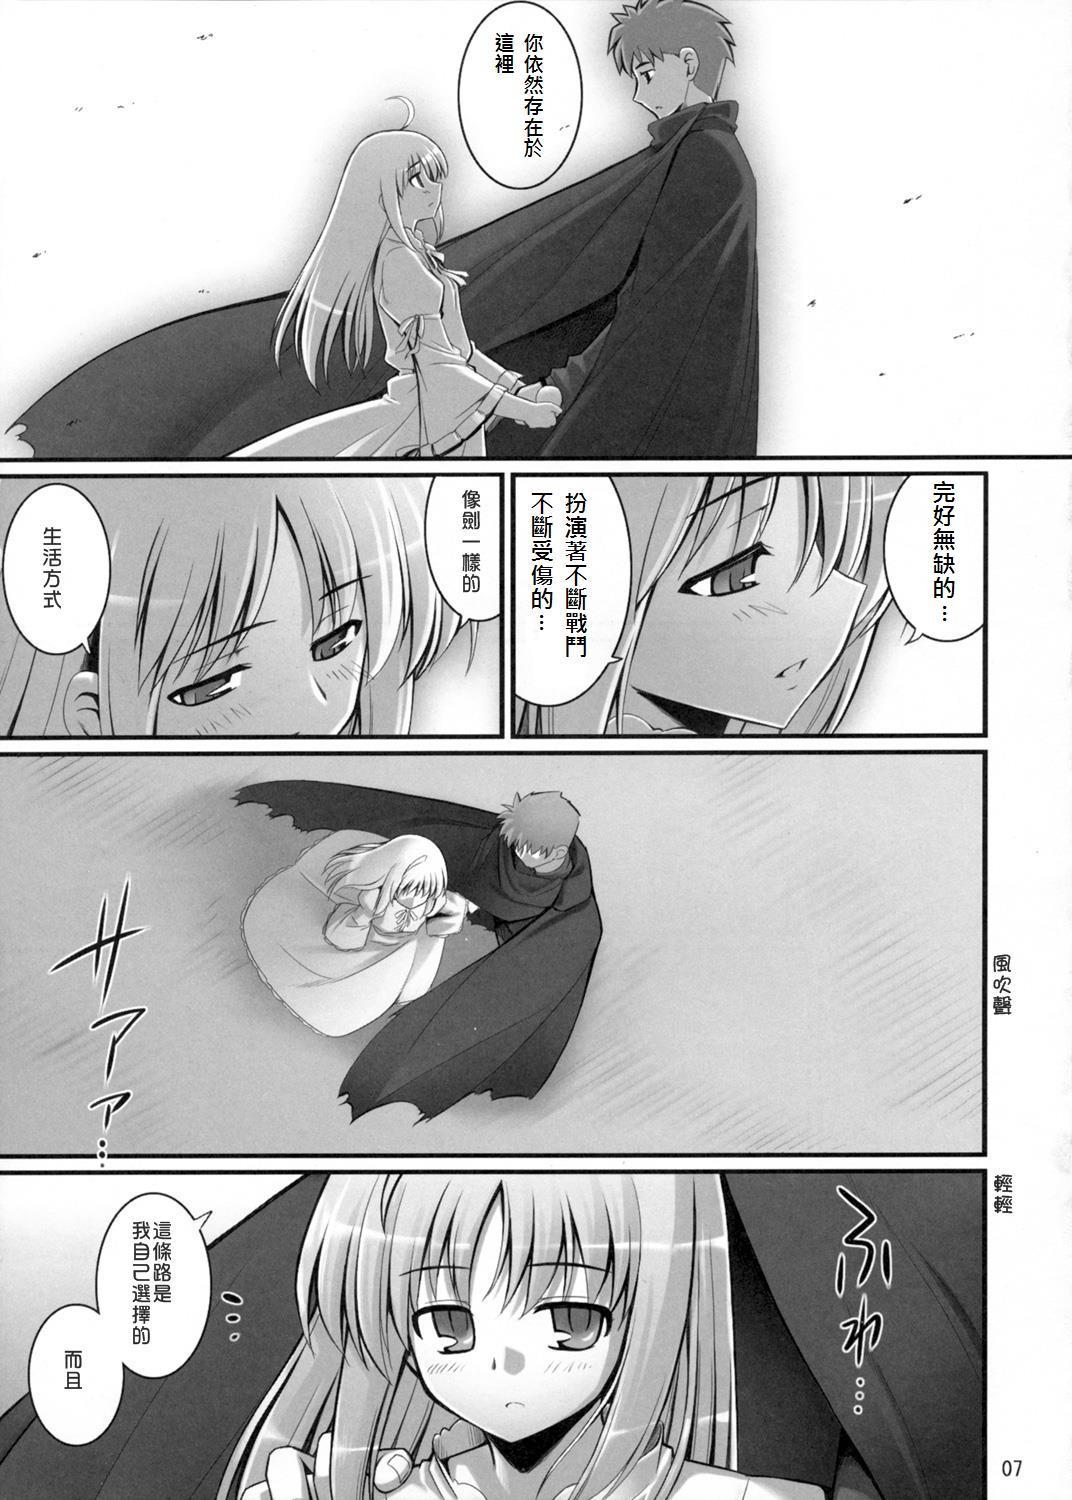 Teasing RE 06 - Fate stay night Ftvgirls - Page 7